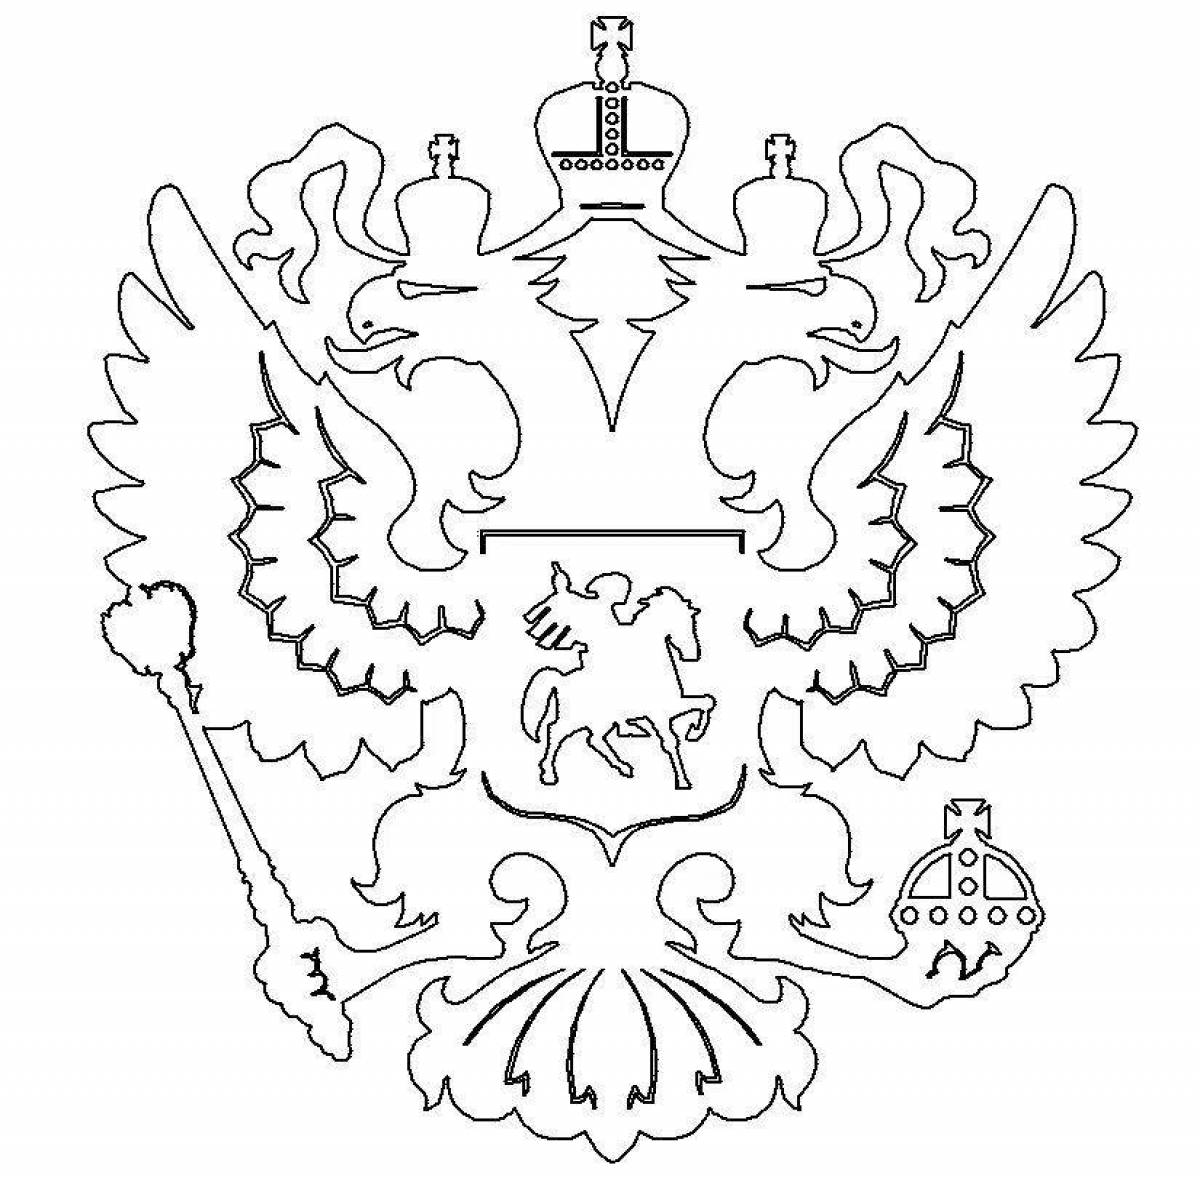 Brightly colored flag and coat of arms of russia